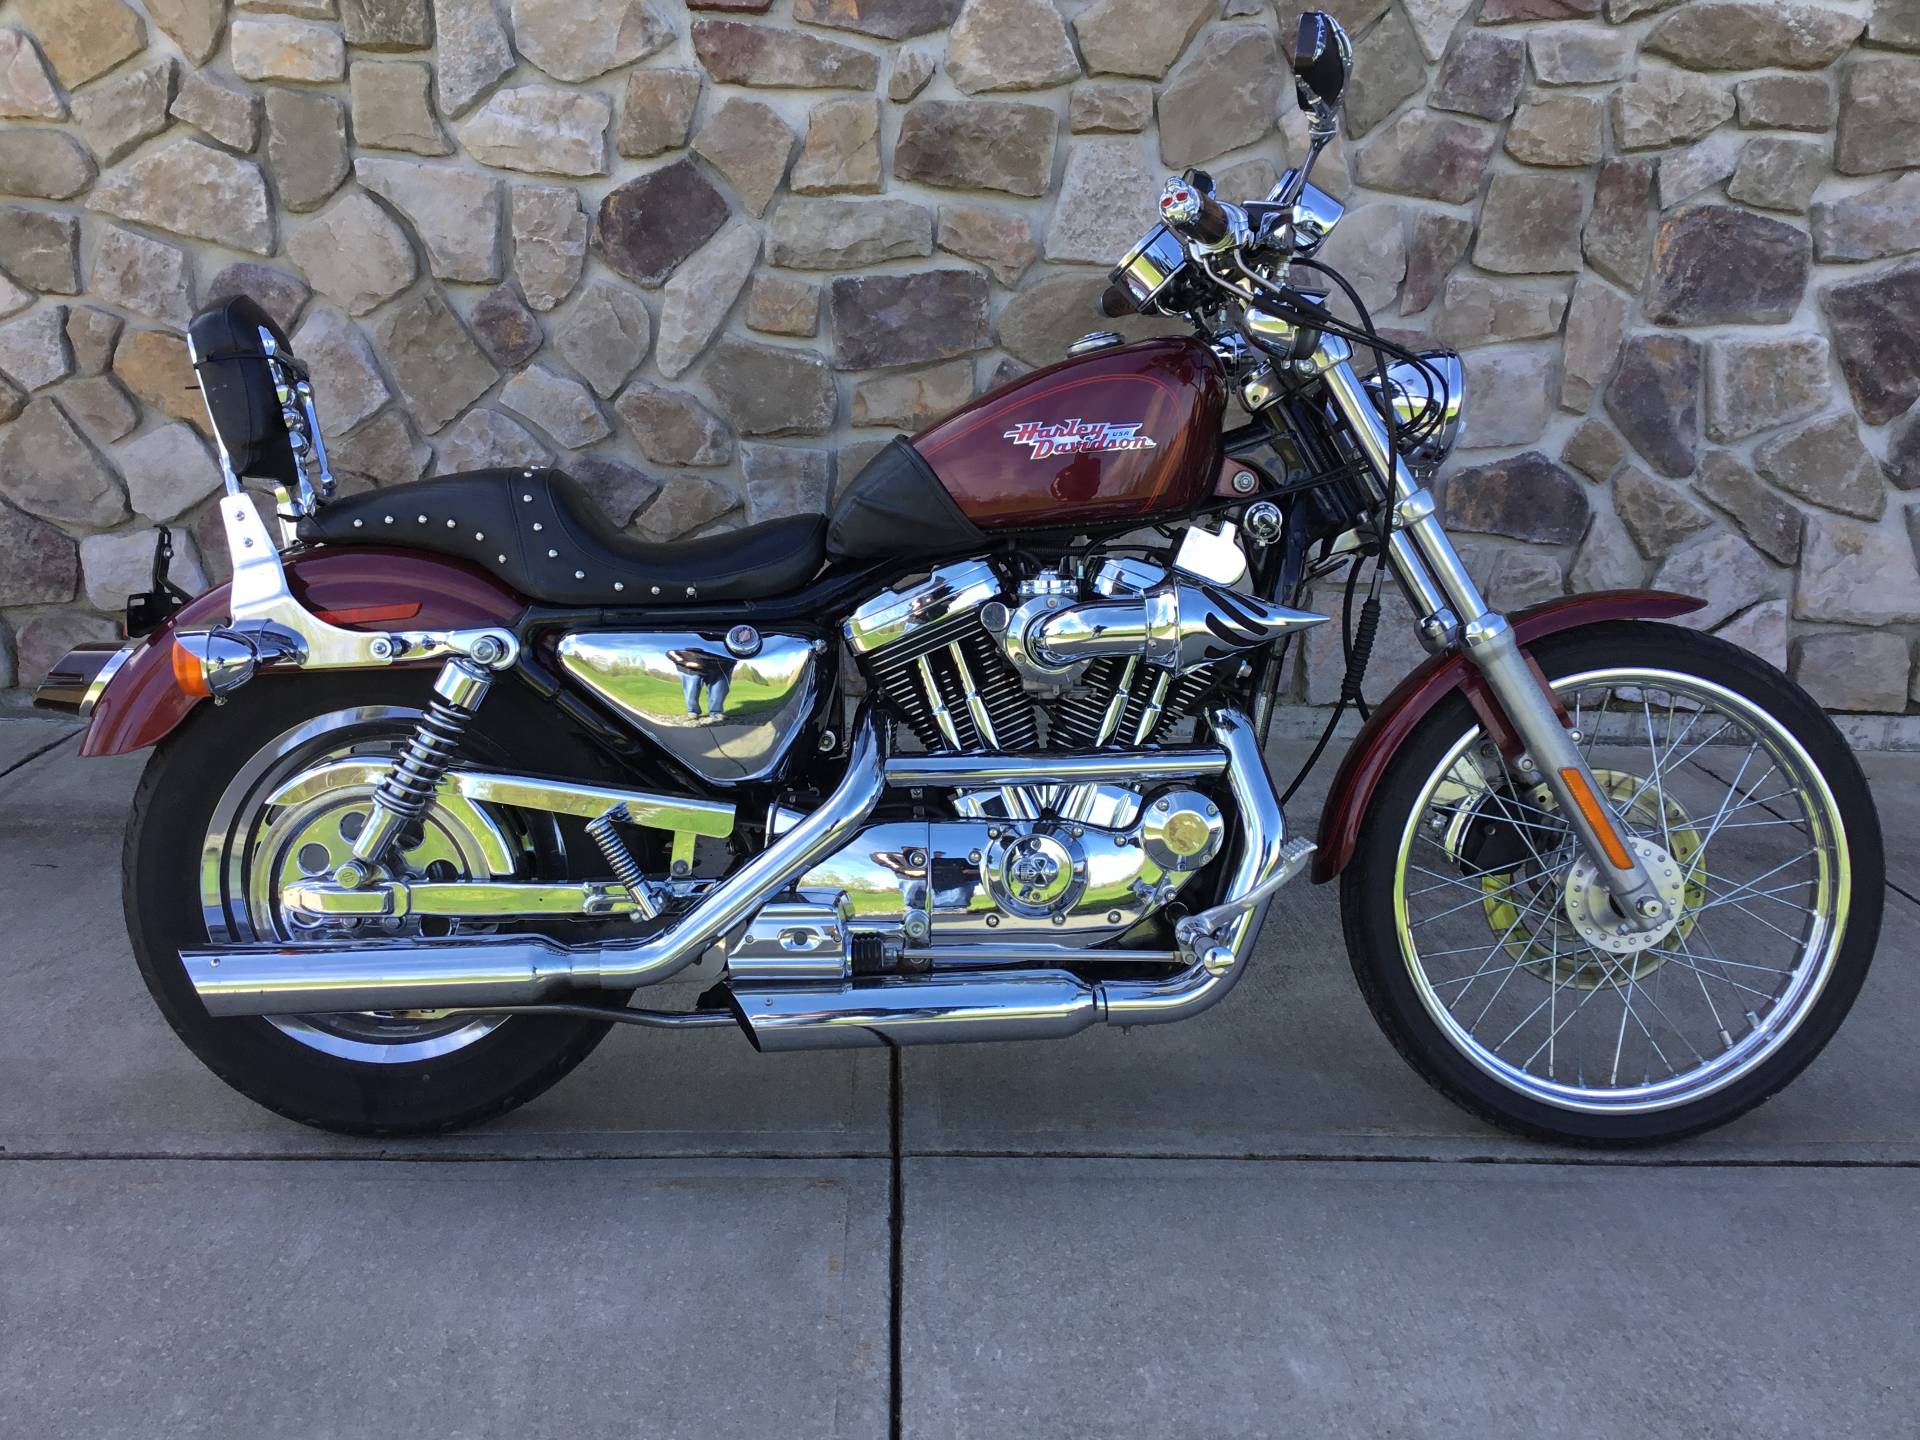 2001 Harley Sportster 1200 - Car View Specs